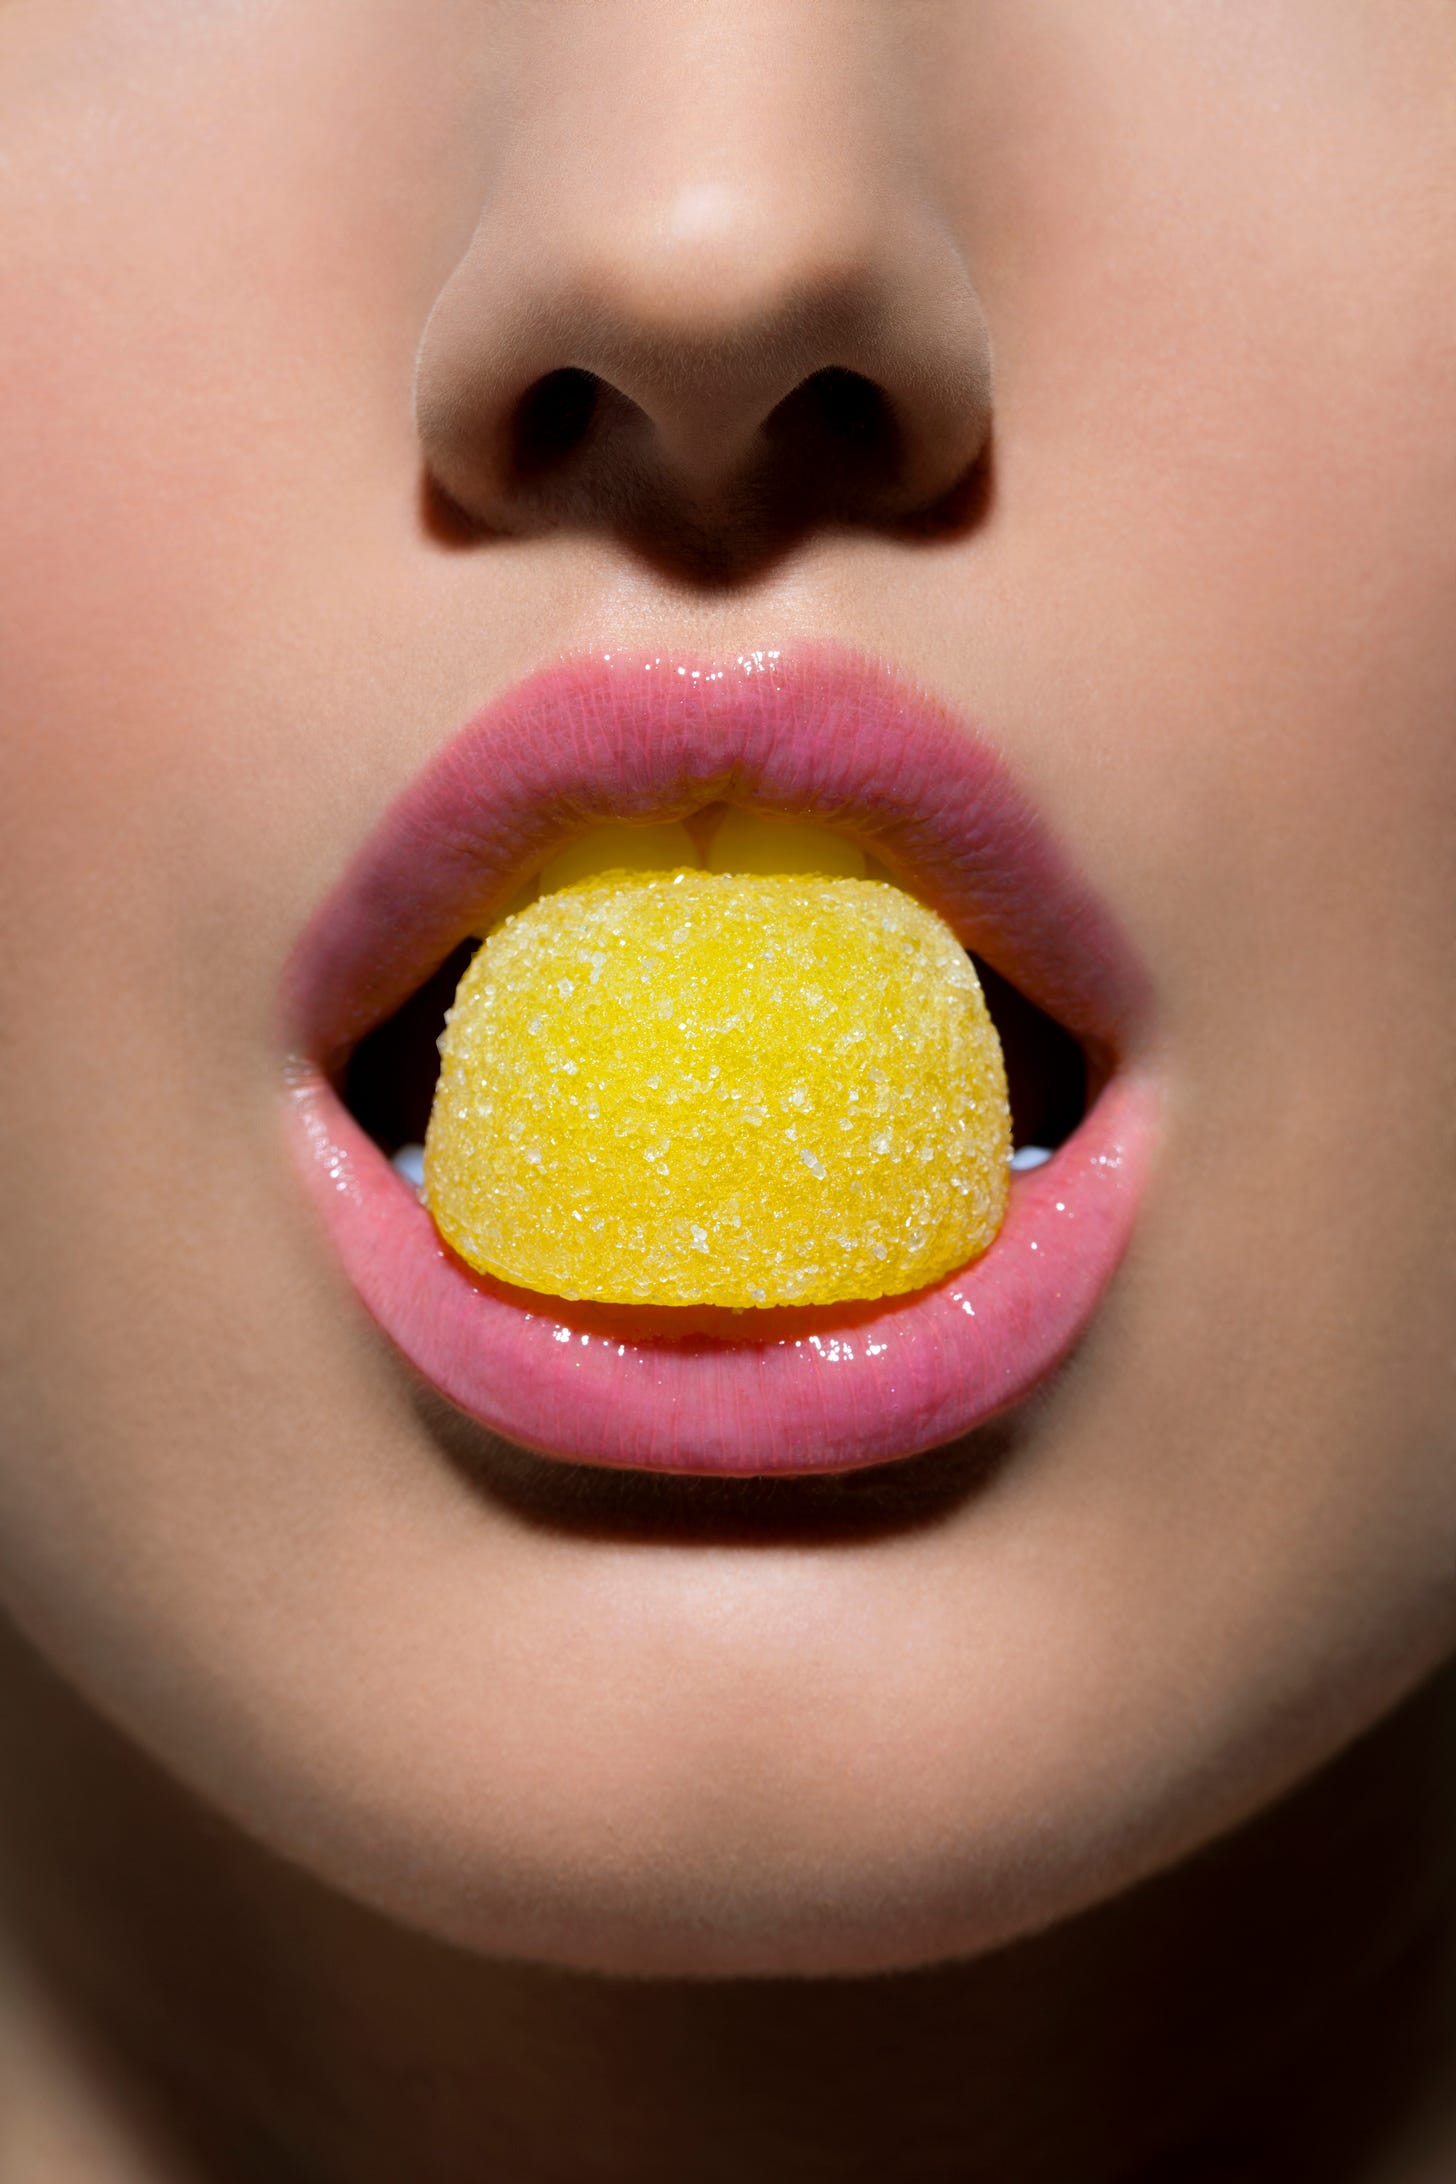 Woman with pale pink lipstick and a bright yellow candy between her teeth